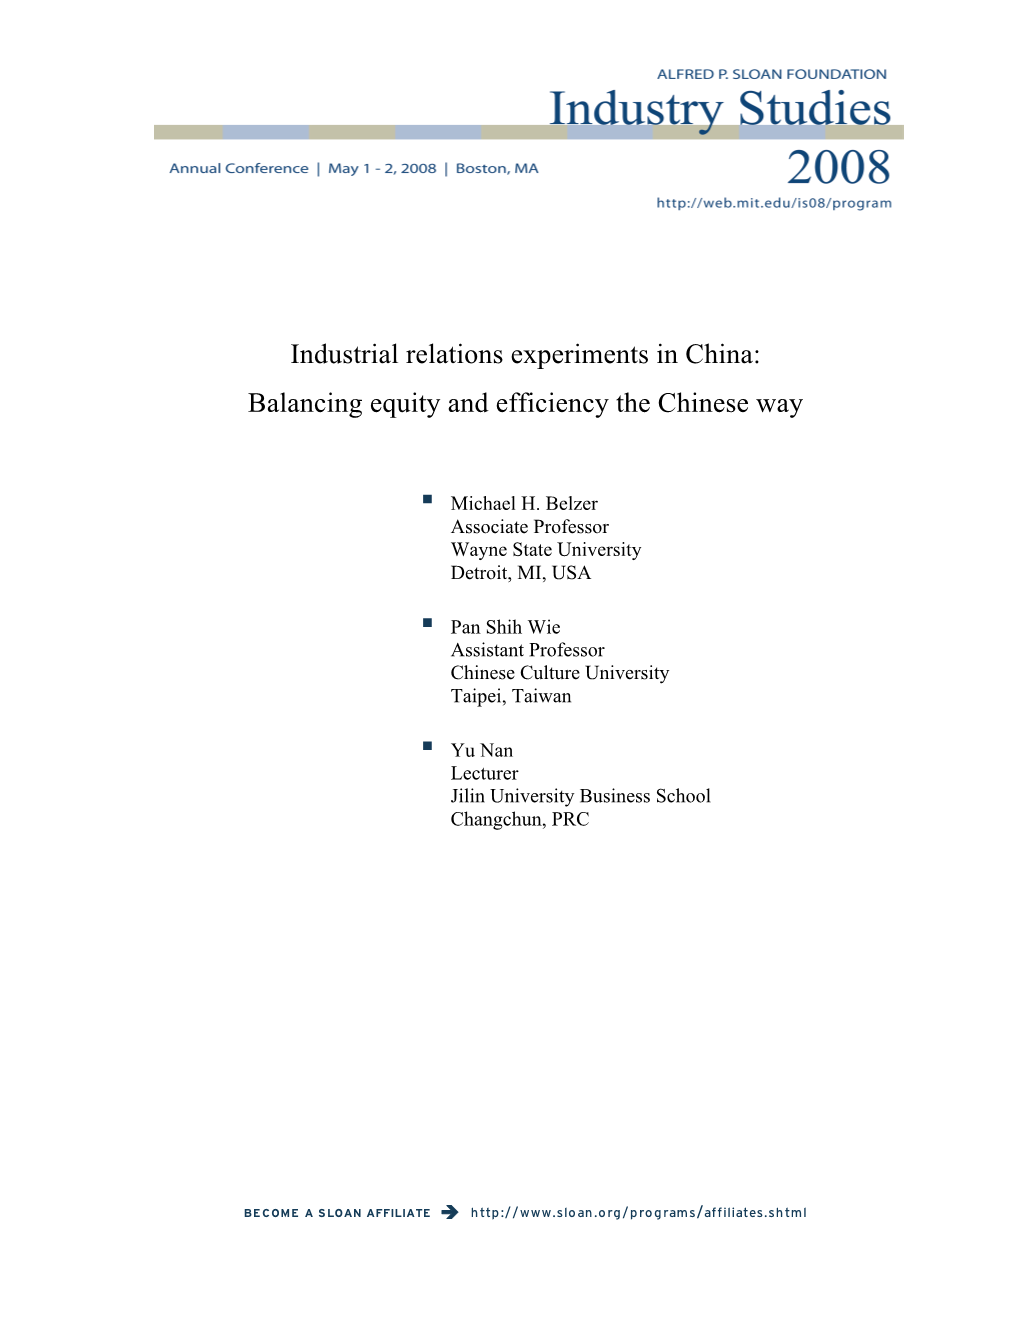 Industrial Relations Experiments in China: Balancing Equity and Efficiency the Chinese Way